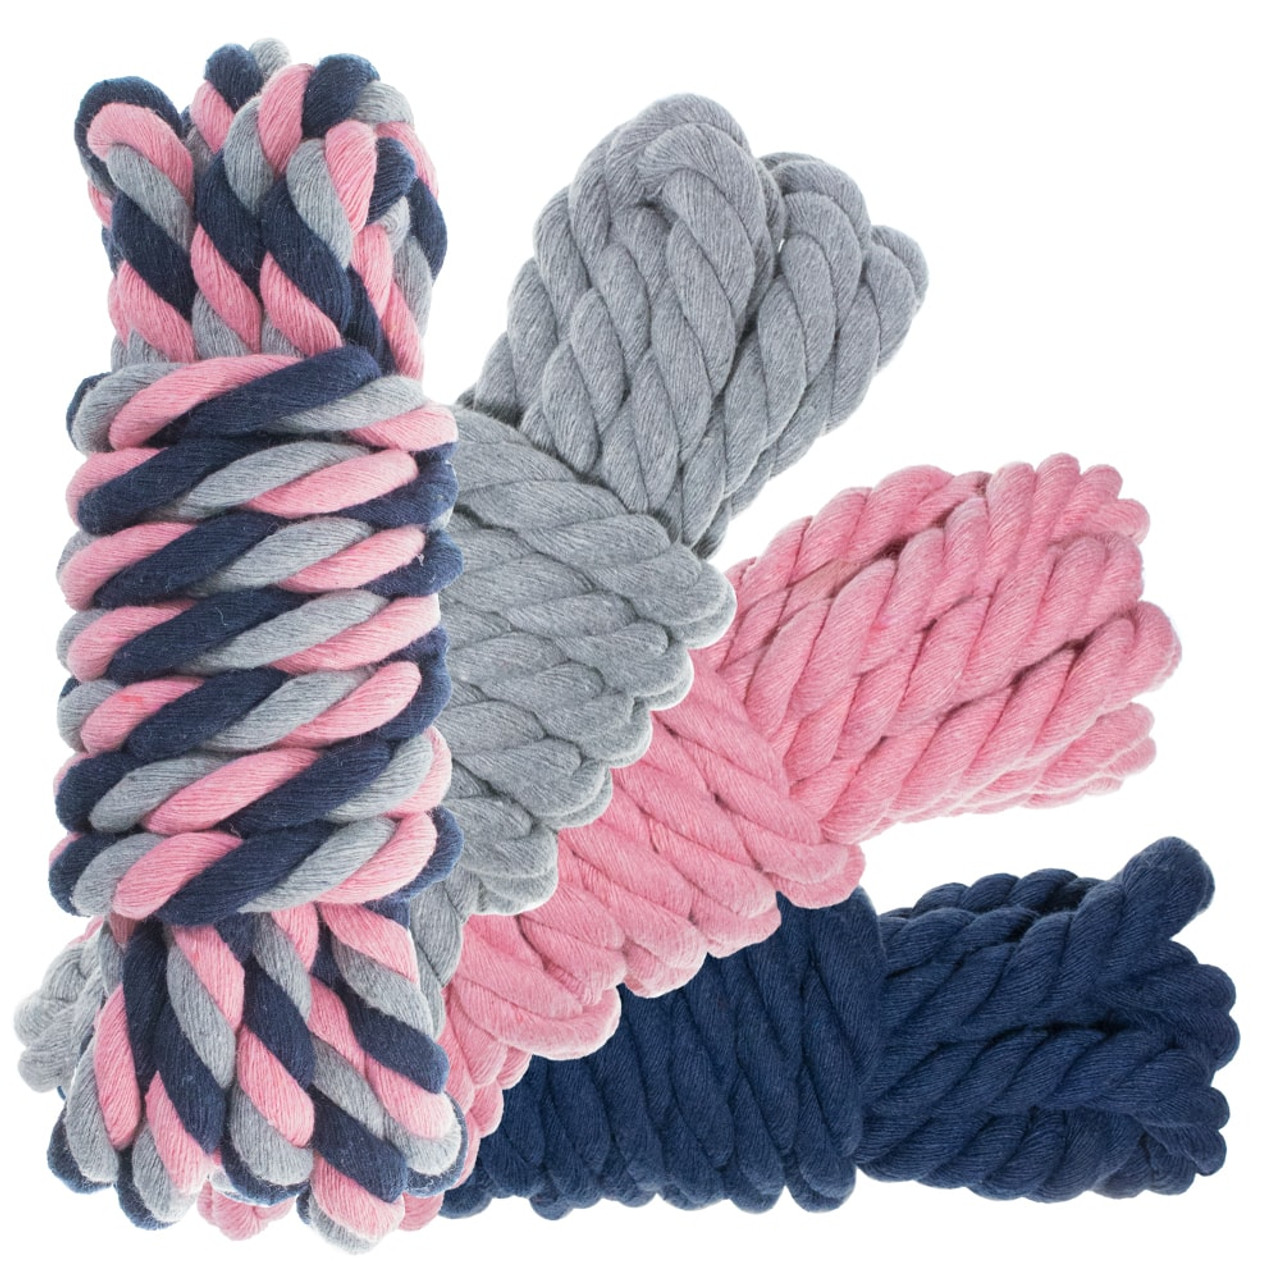 Twisted Natural Cotton Rope - 1/4 Inch - Solid Colors - Variety of